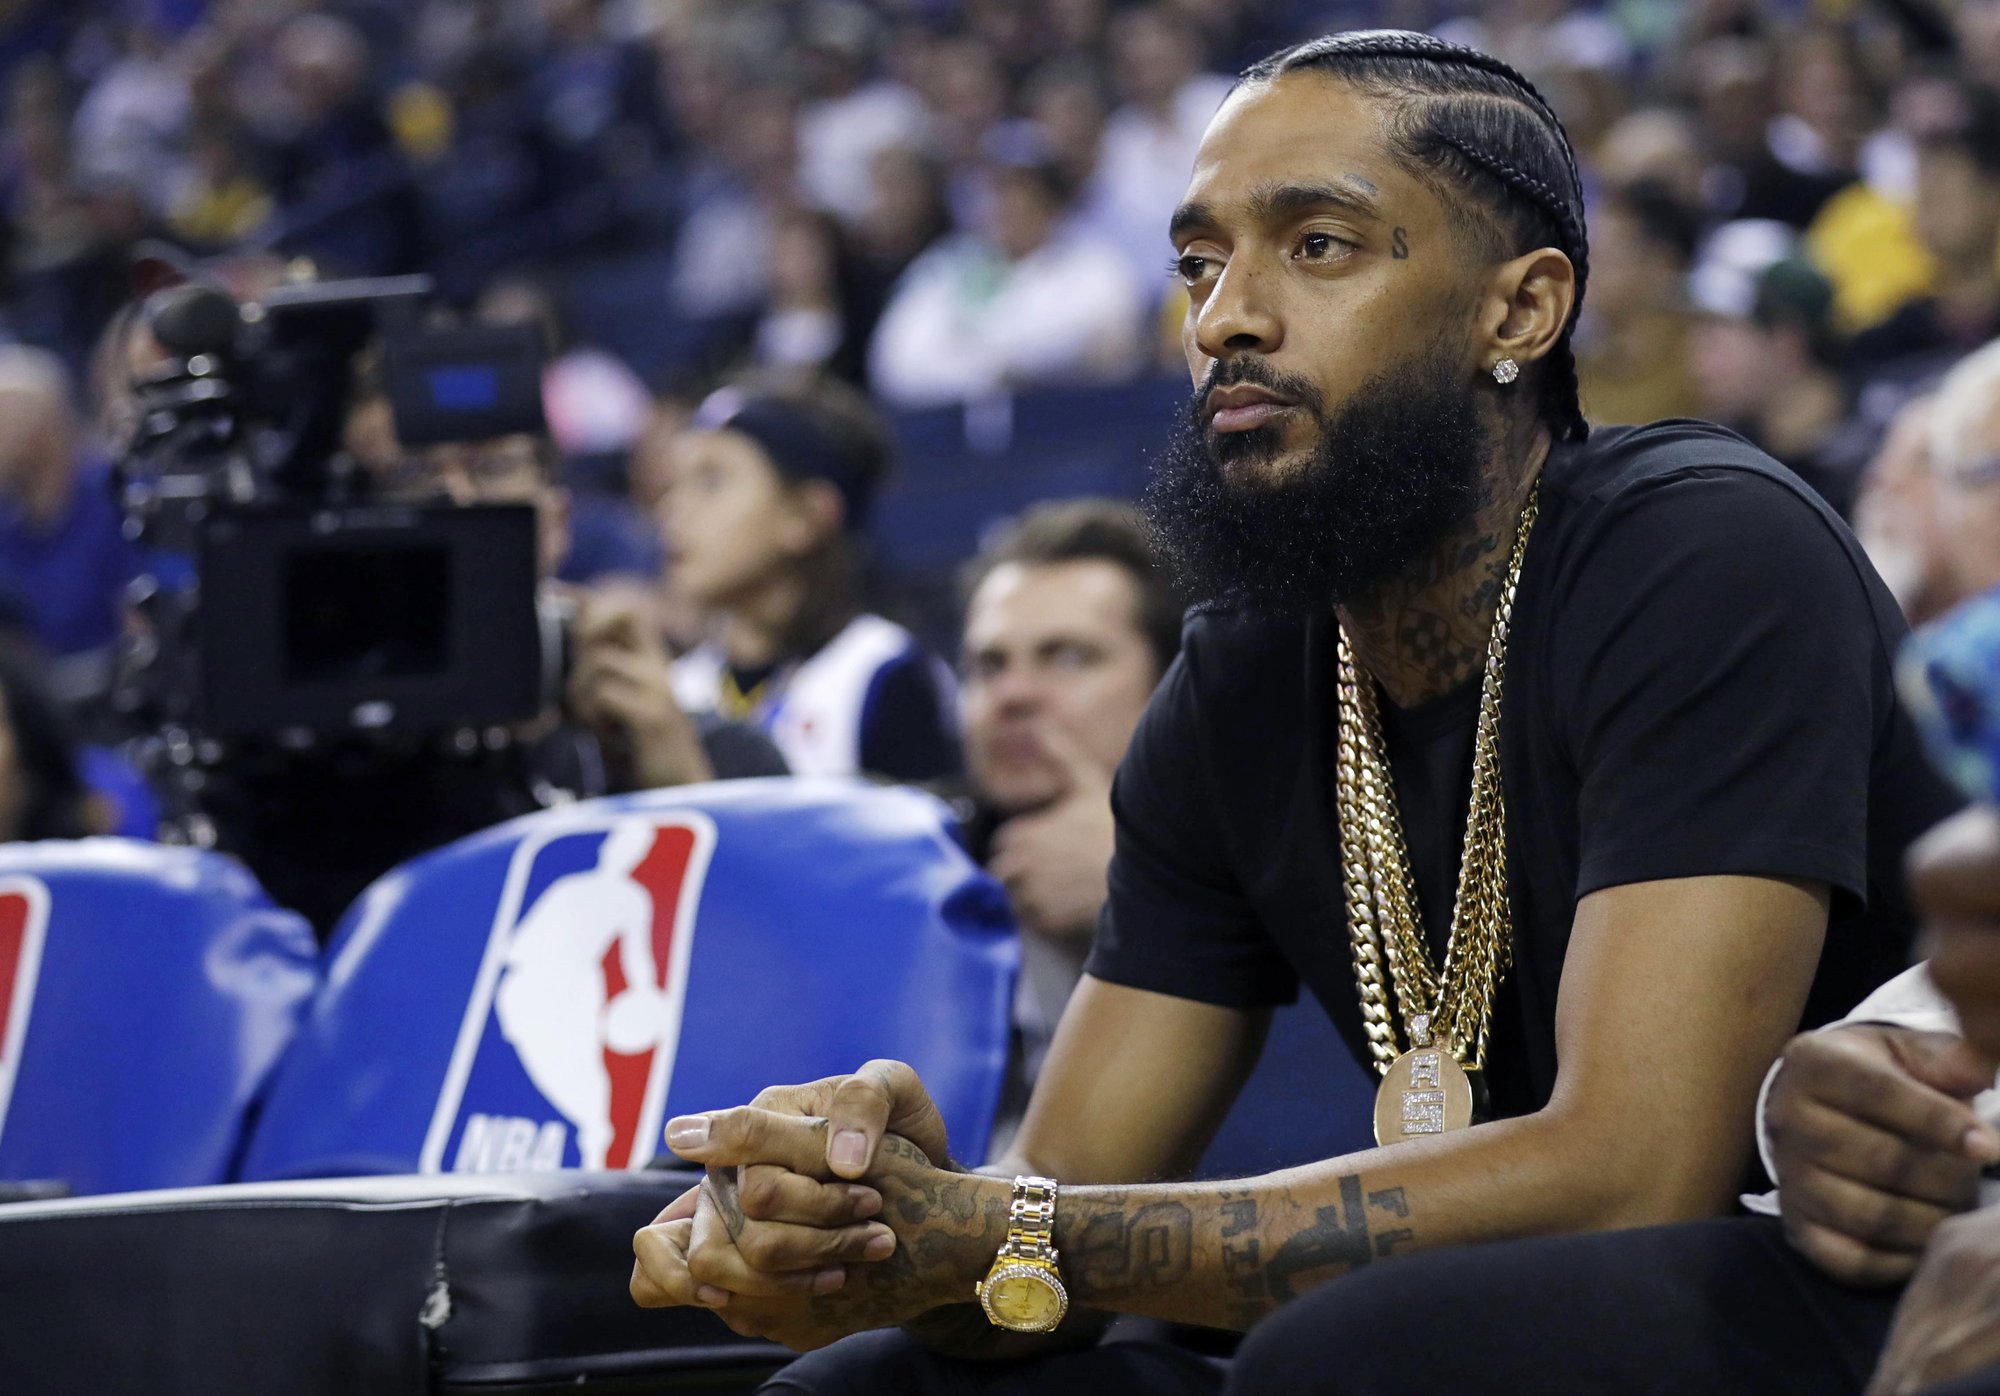 Los Angeles police identify suspect in rapper Nipsey Hussle slaying | The Zimbabwe Mail